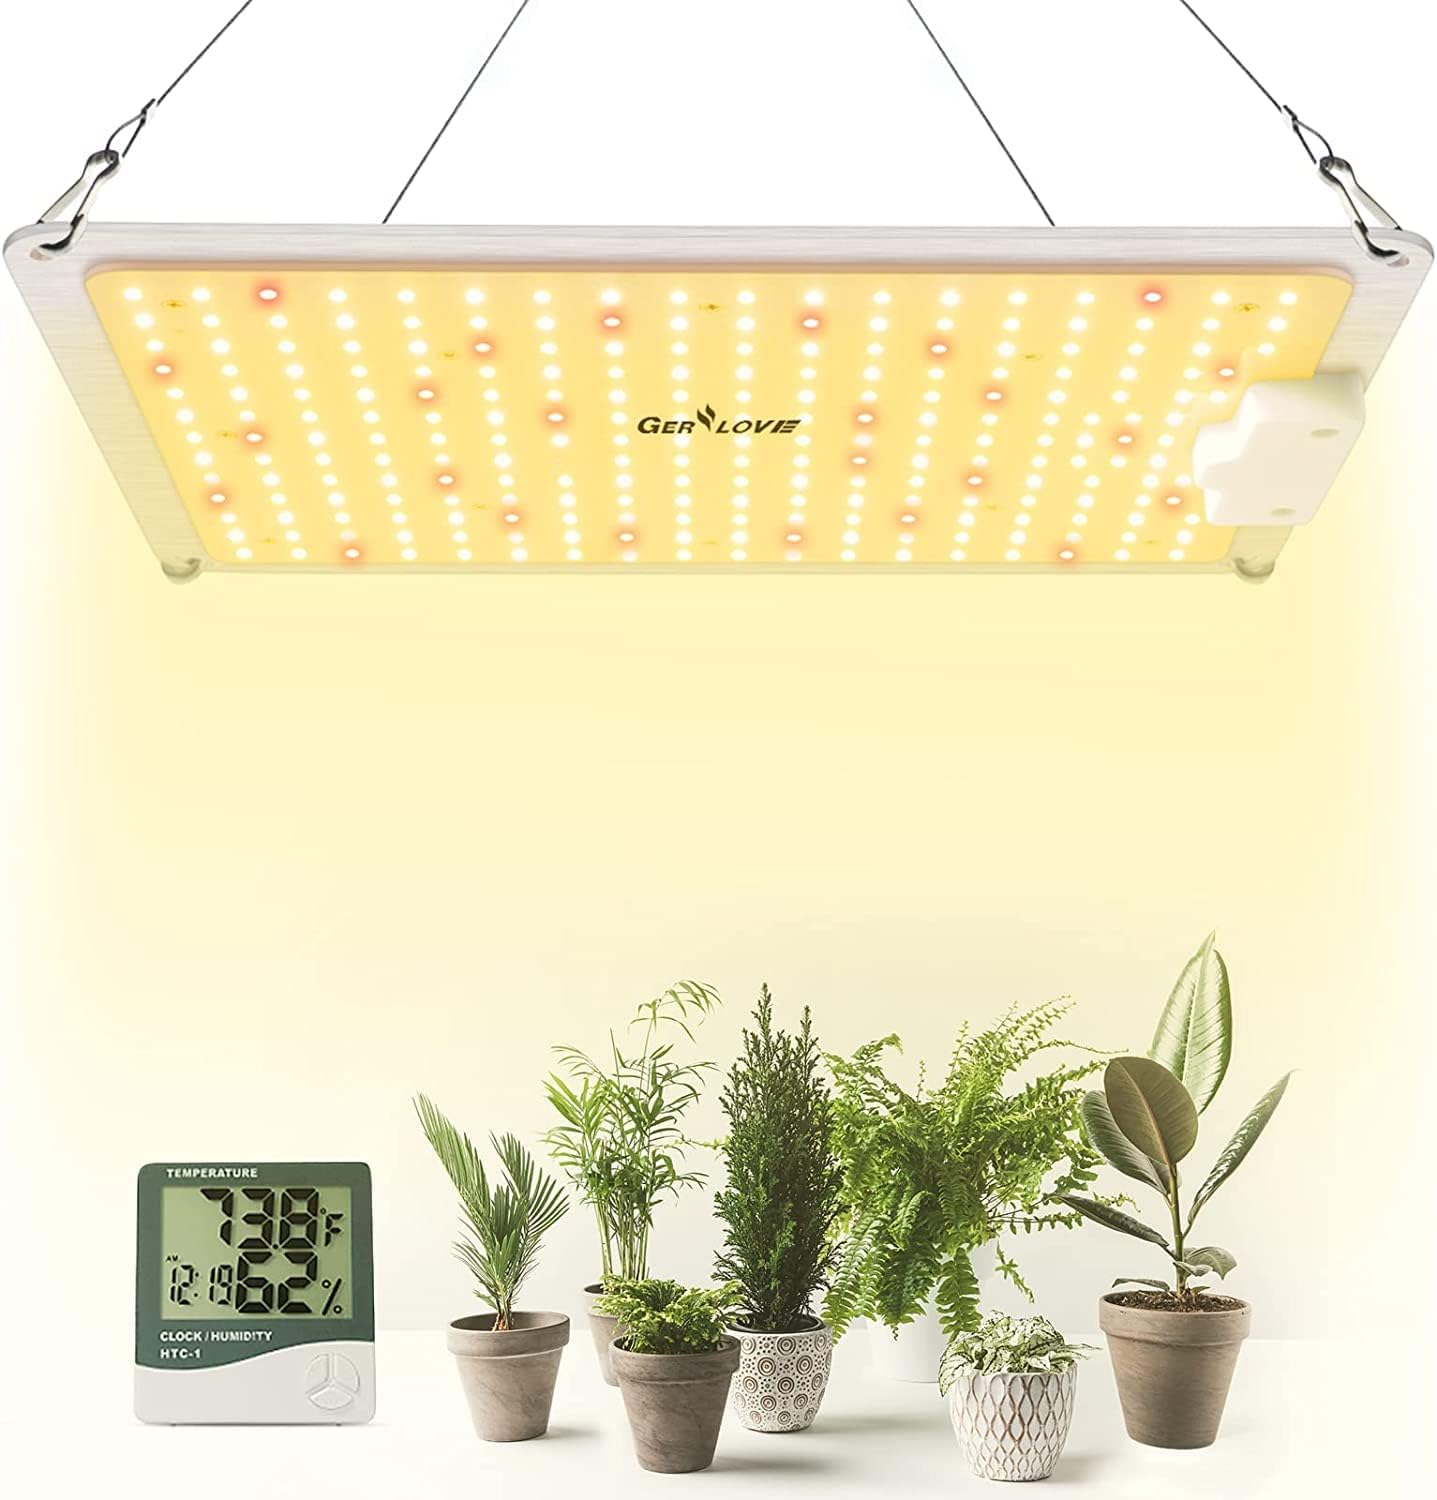 LED Grow Light, 1000W Full Spectrum Dimmable Plant Lights is very bright, dimmable, and works great! A very good light in it' price range. I've been running it non stop for several months now and recently set it up on a timer. I have no complaints about this light and would suggest others to buy it if they are on a budget. This is my fist light so I can't compare it to the more expensive ones, but it does well for a 3 x 3 foot space.